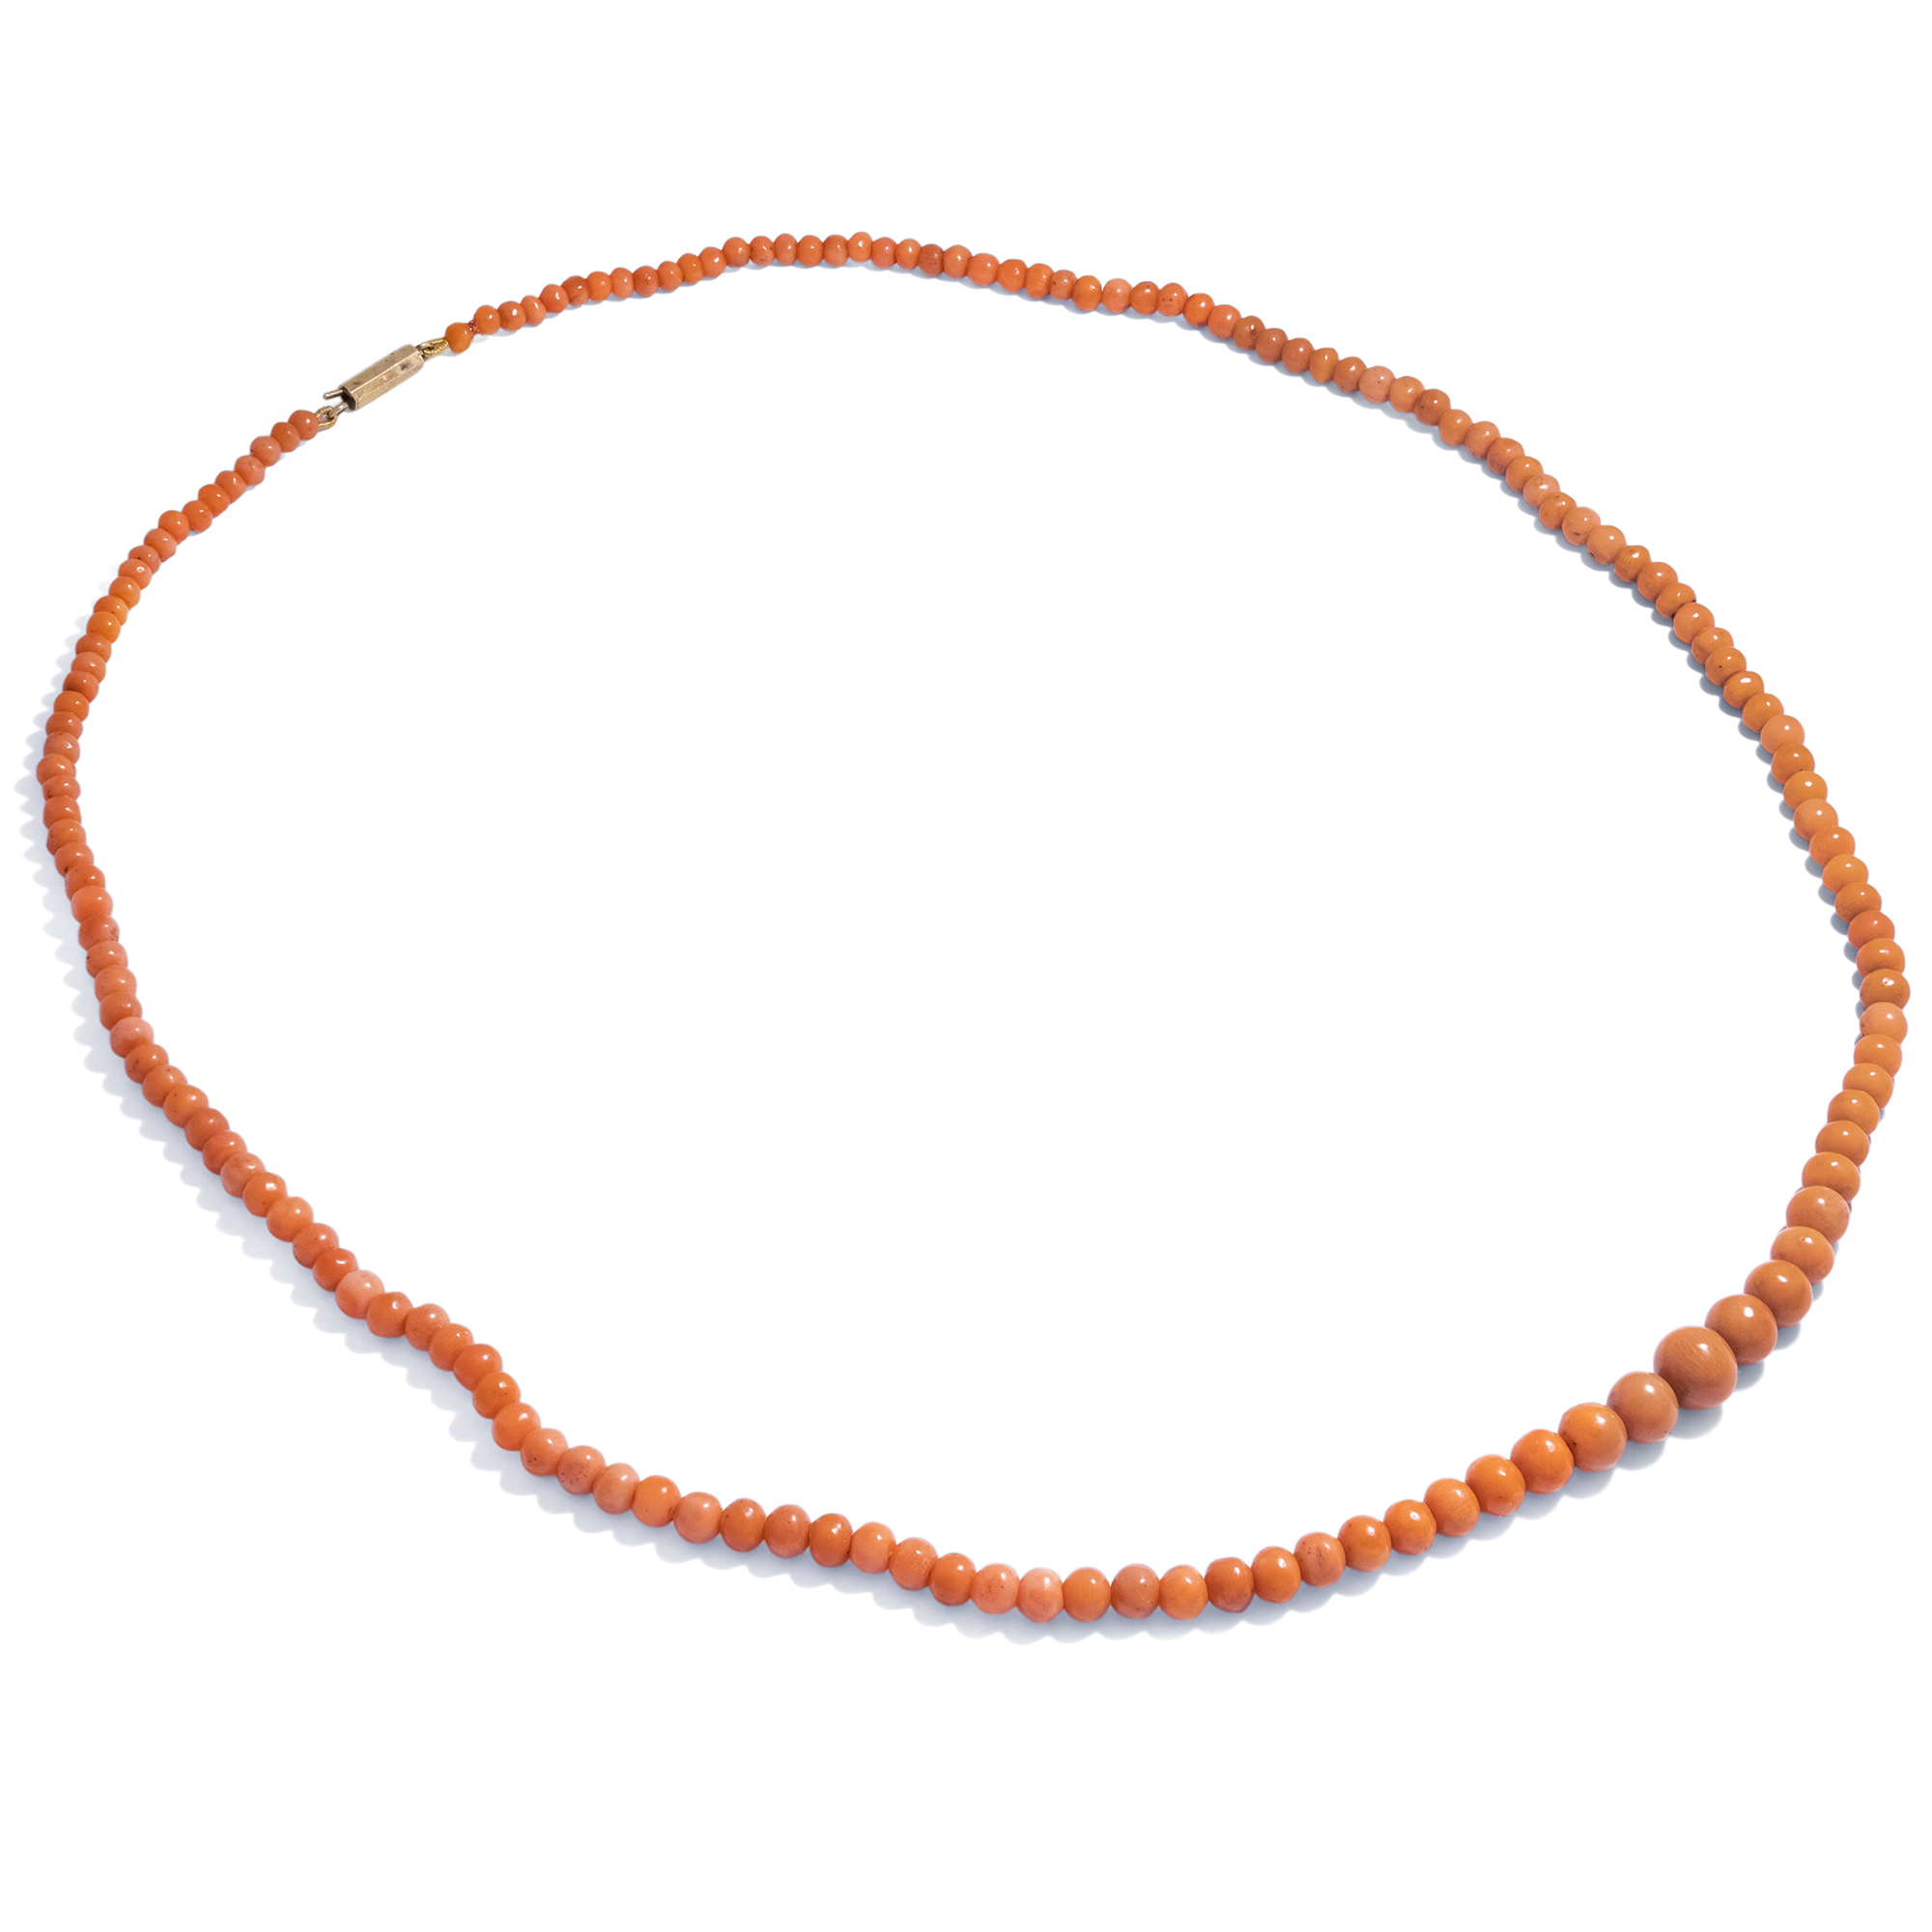 Antique Necklace Made of Salmon Coral with Gold Clasp, ca. 1900